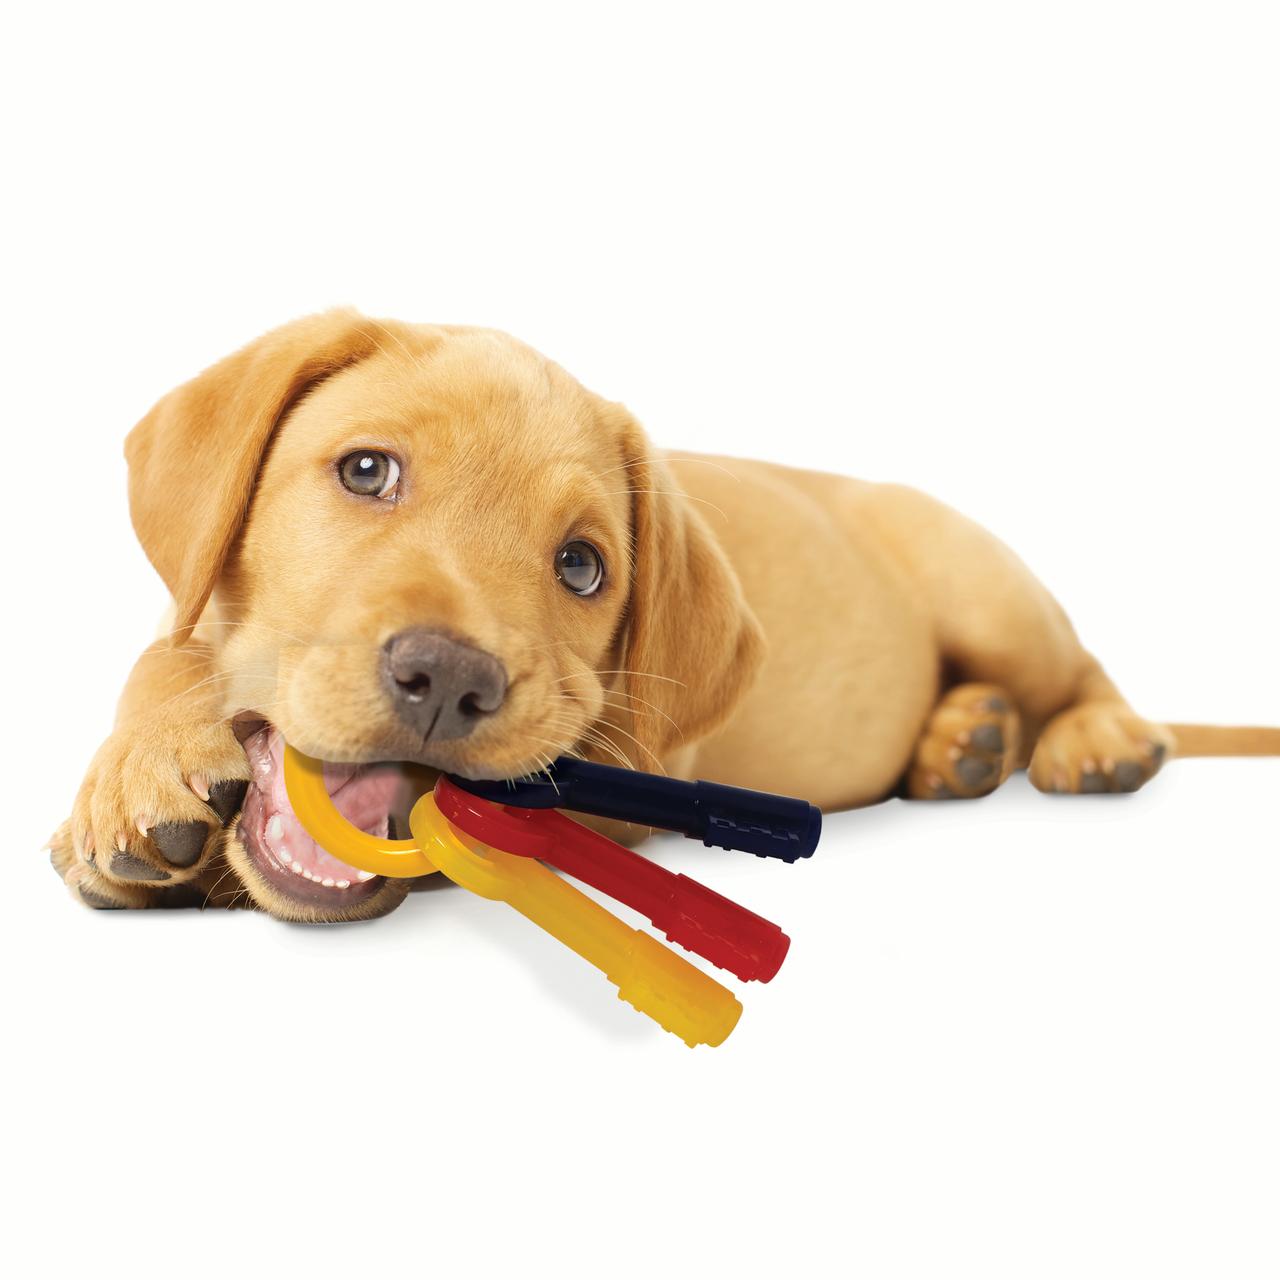 Nylabone Just for Puppies Teething Chew Toy Keys Bacon Medium/Wolf (1 Count) - image 3 of 7